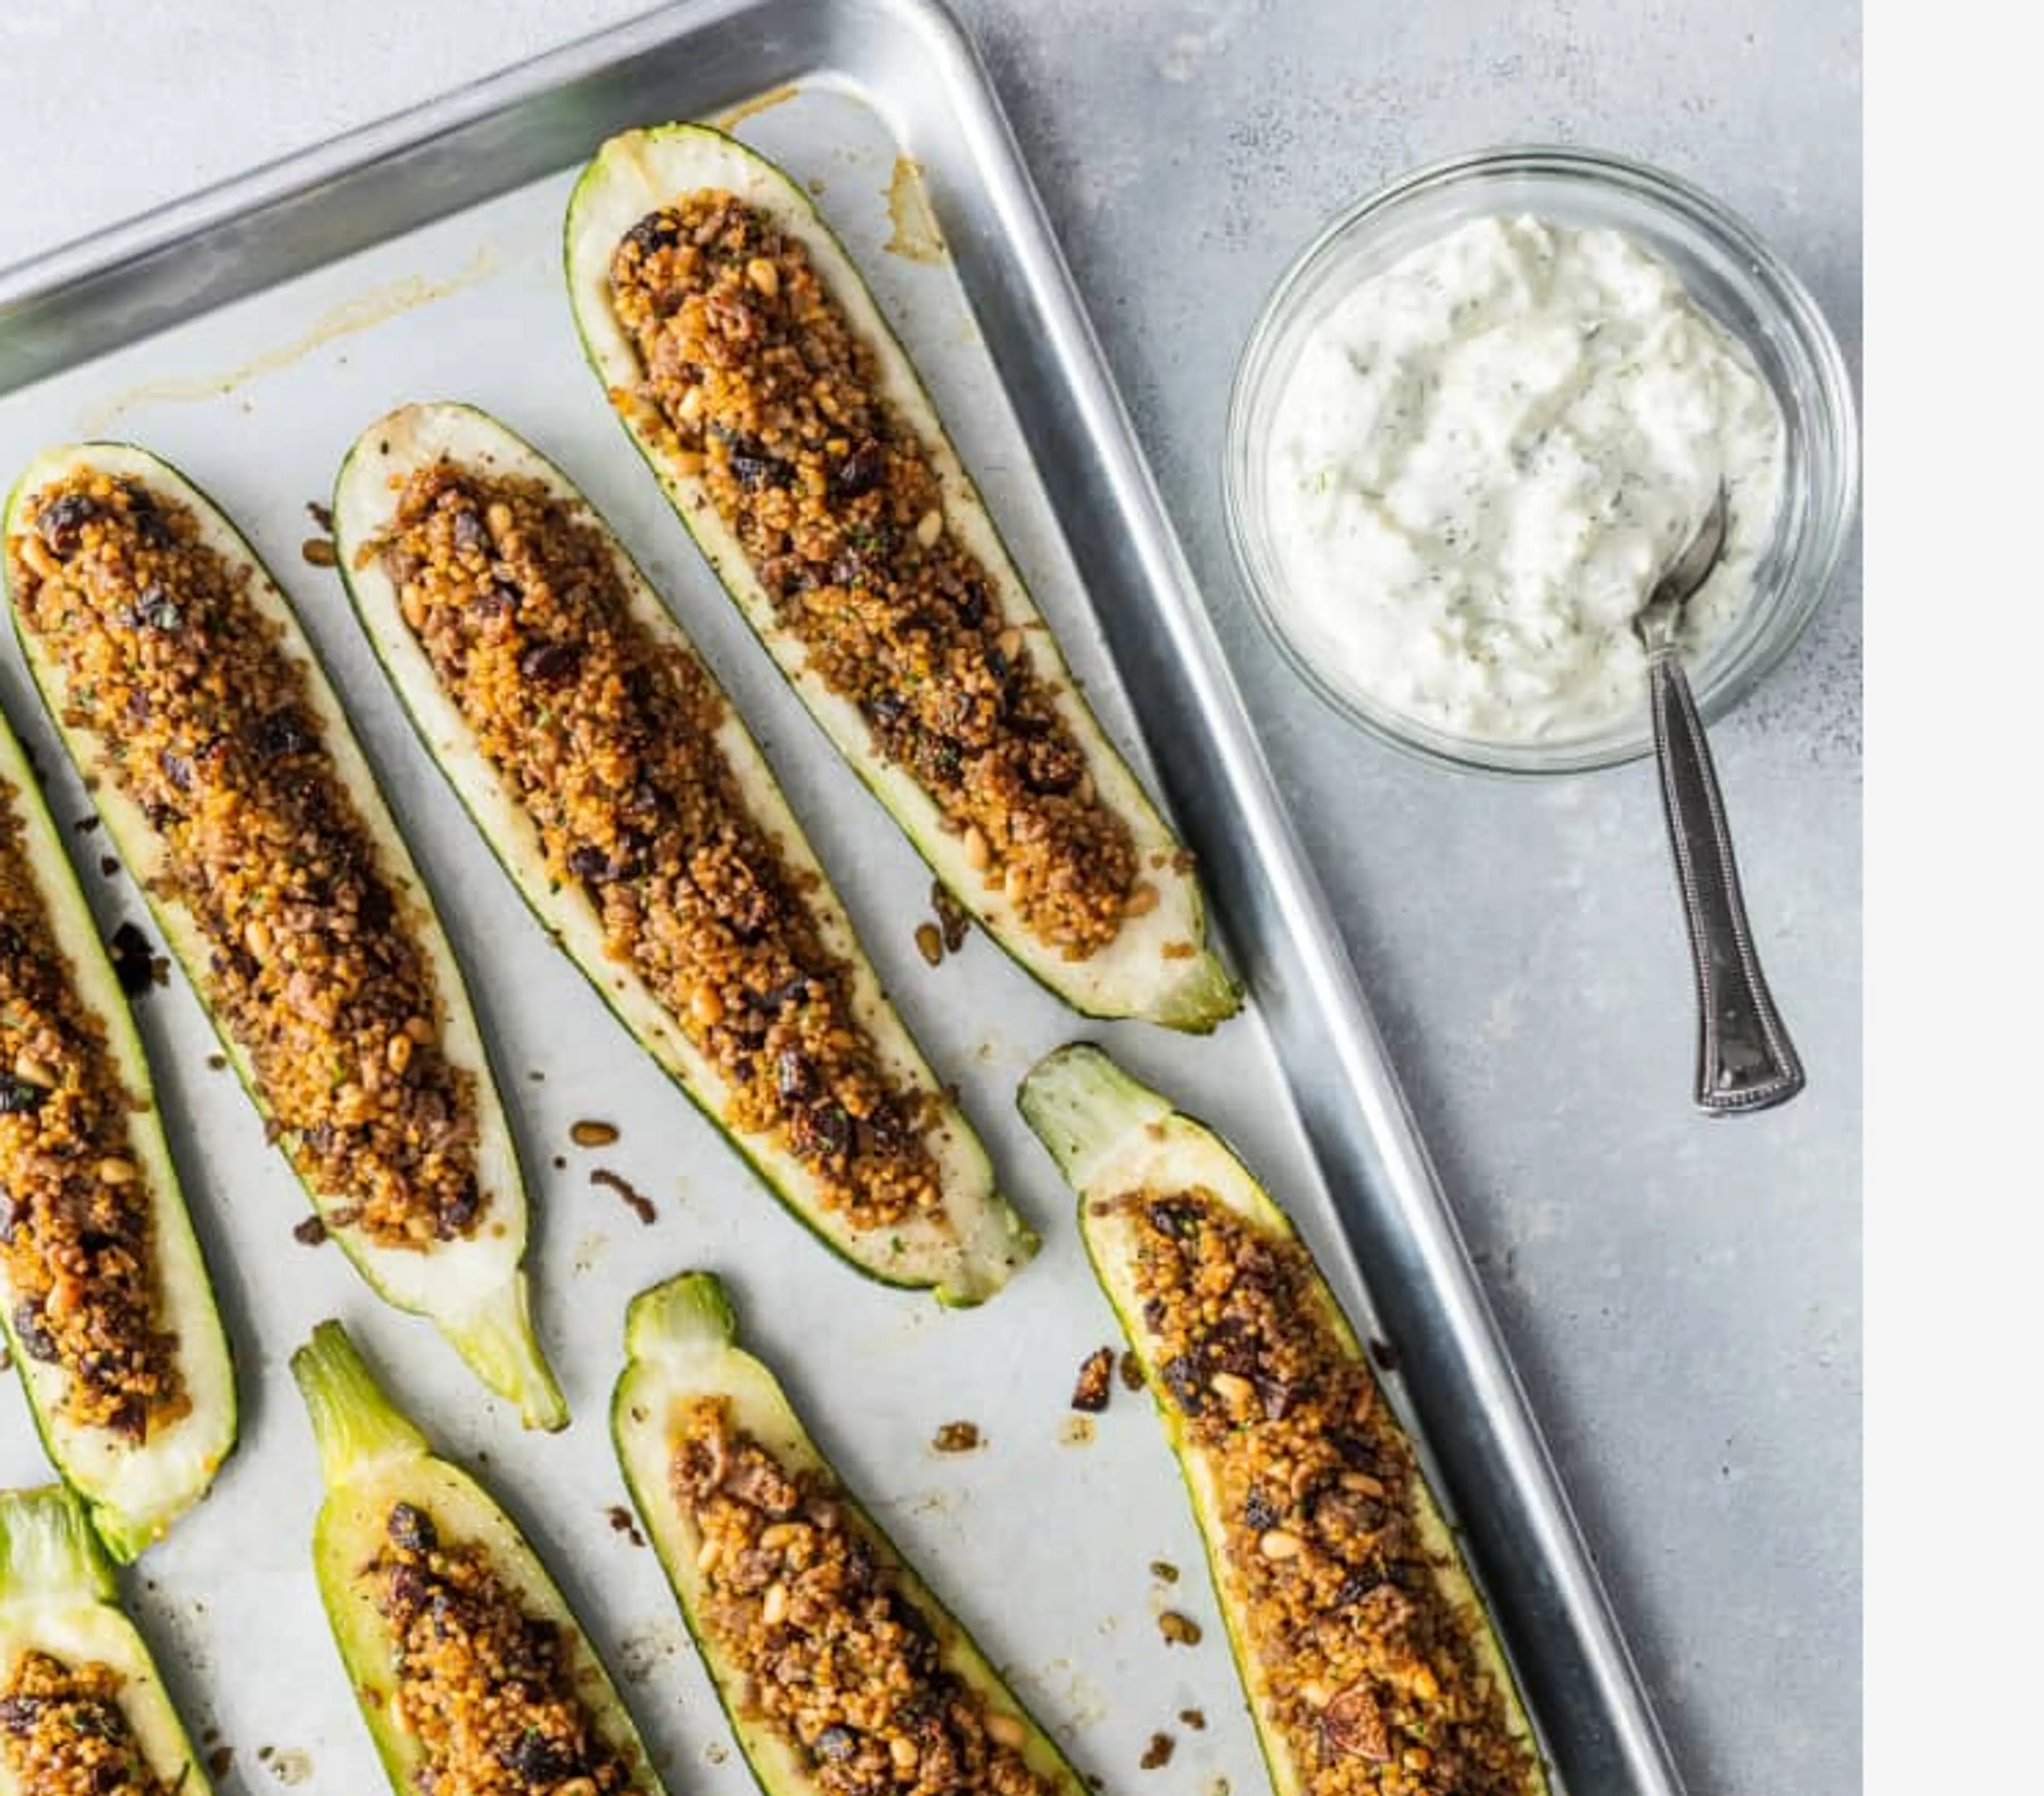 Stuffed Zucchini with spiced lamb, dried apricots, and pine